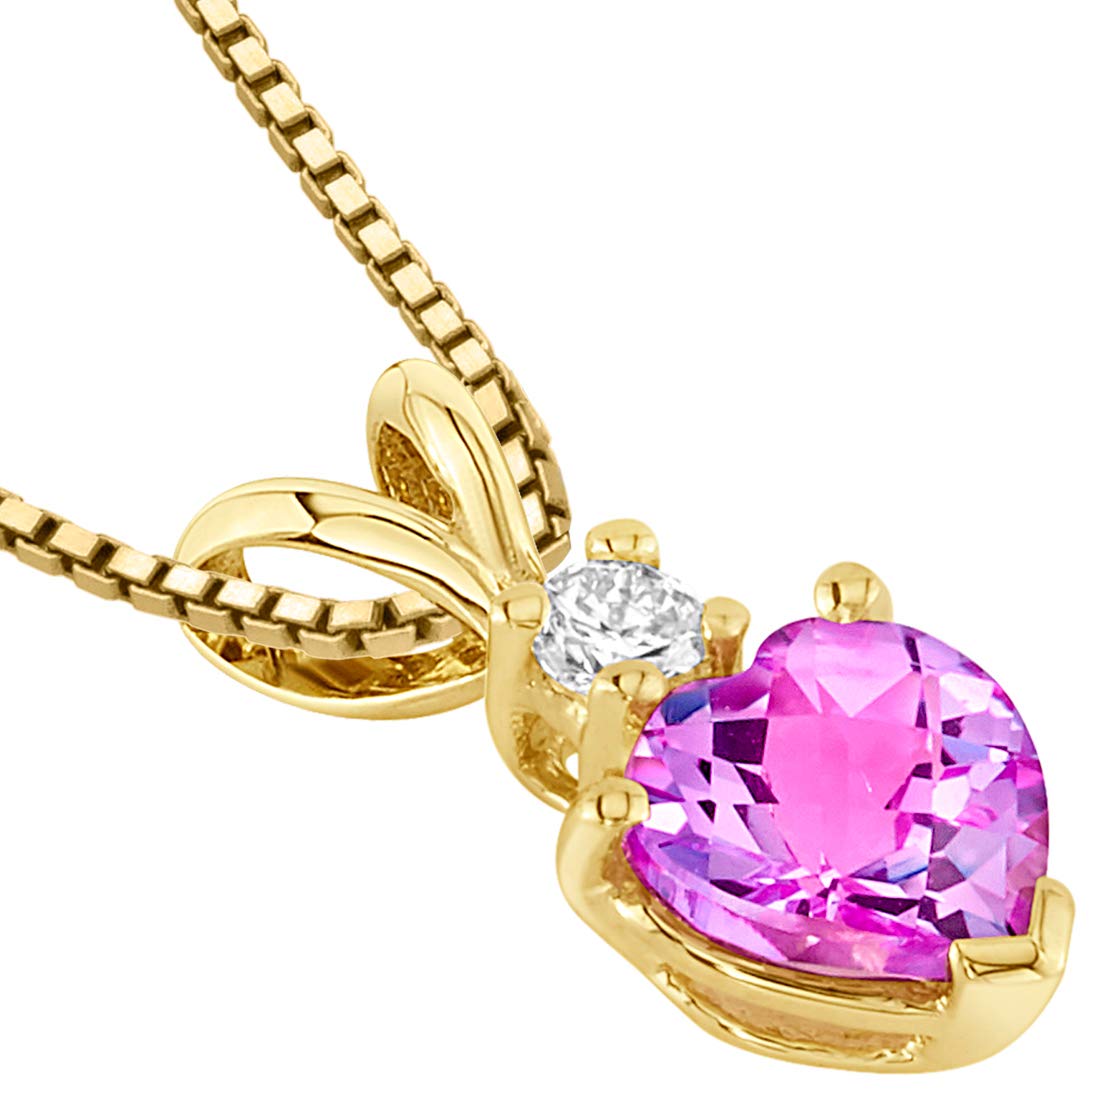 Peora Created Pink Sapphire with Genuine Diamond Pendant in 14 Karat Yellow Gold, Heart Shape Solitaire, 6mm, 1.15 Carats total